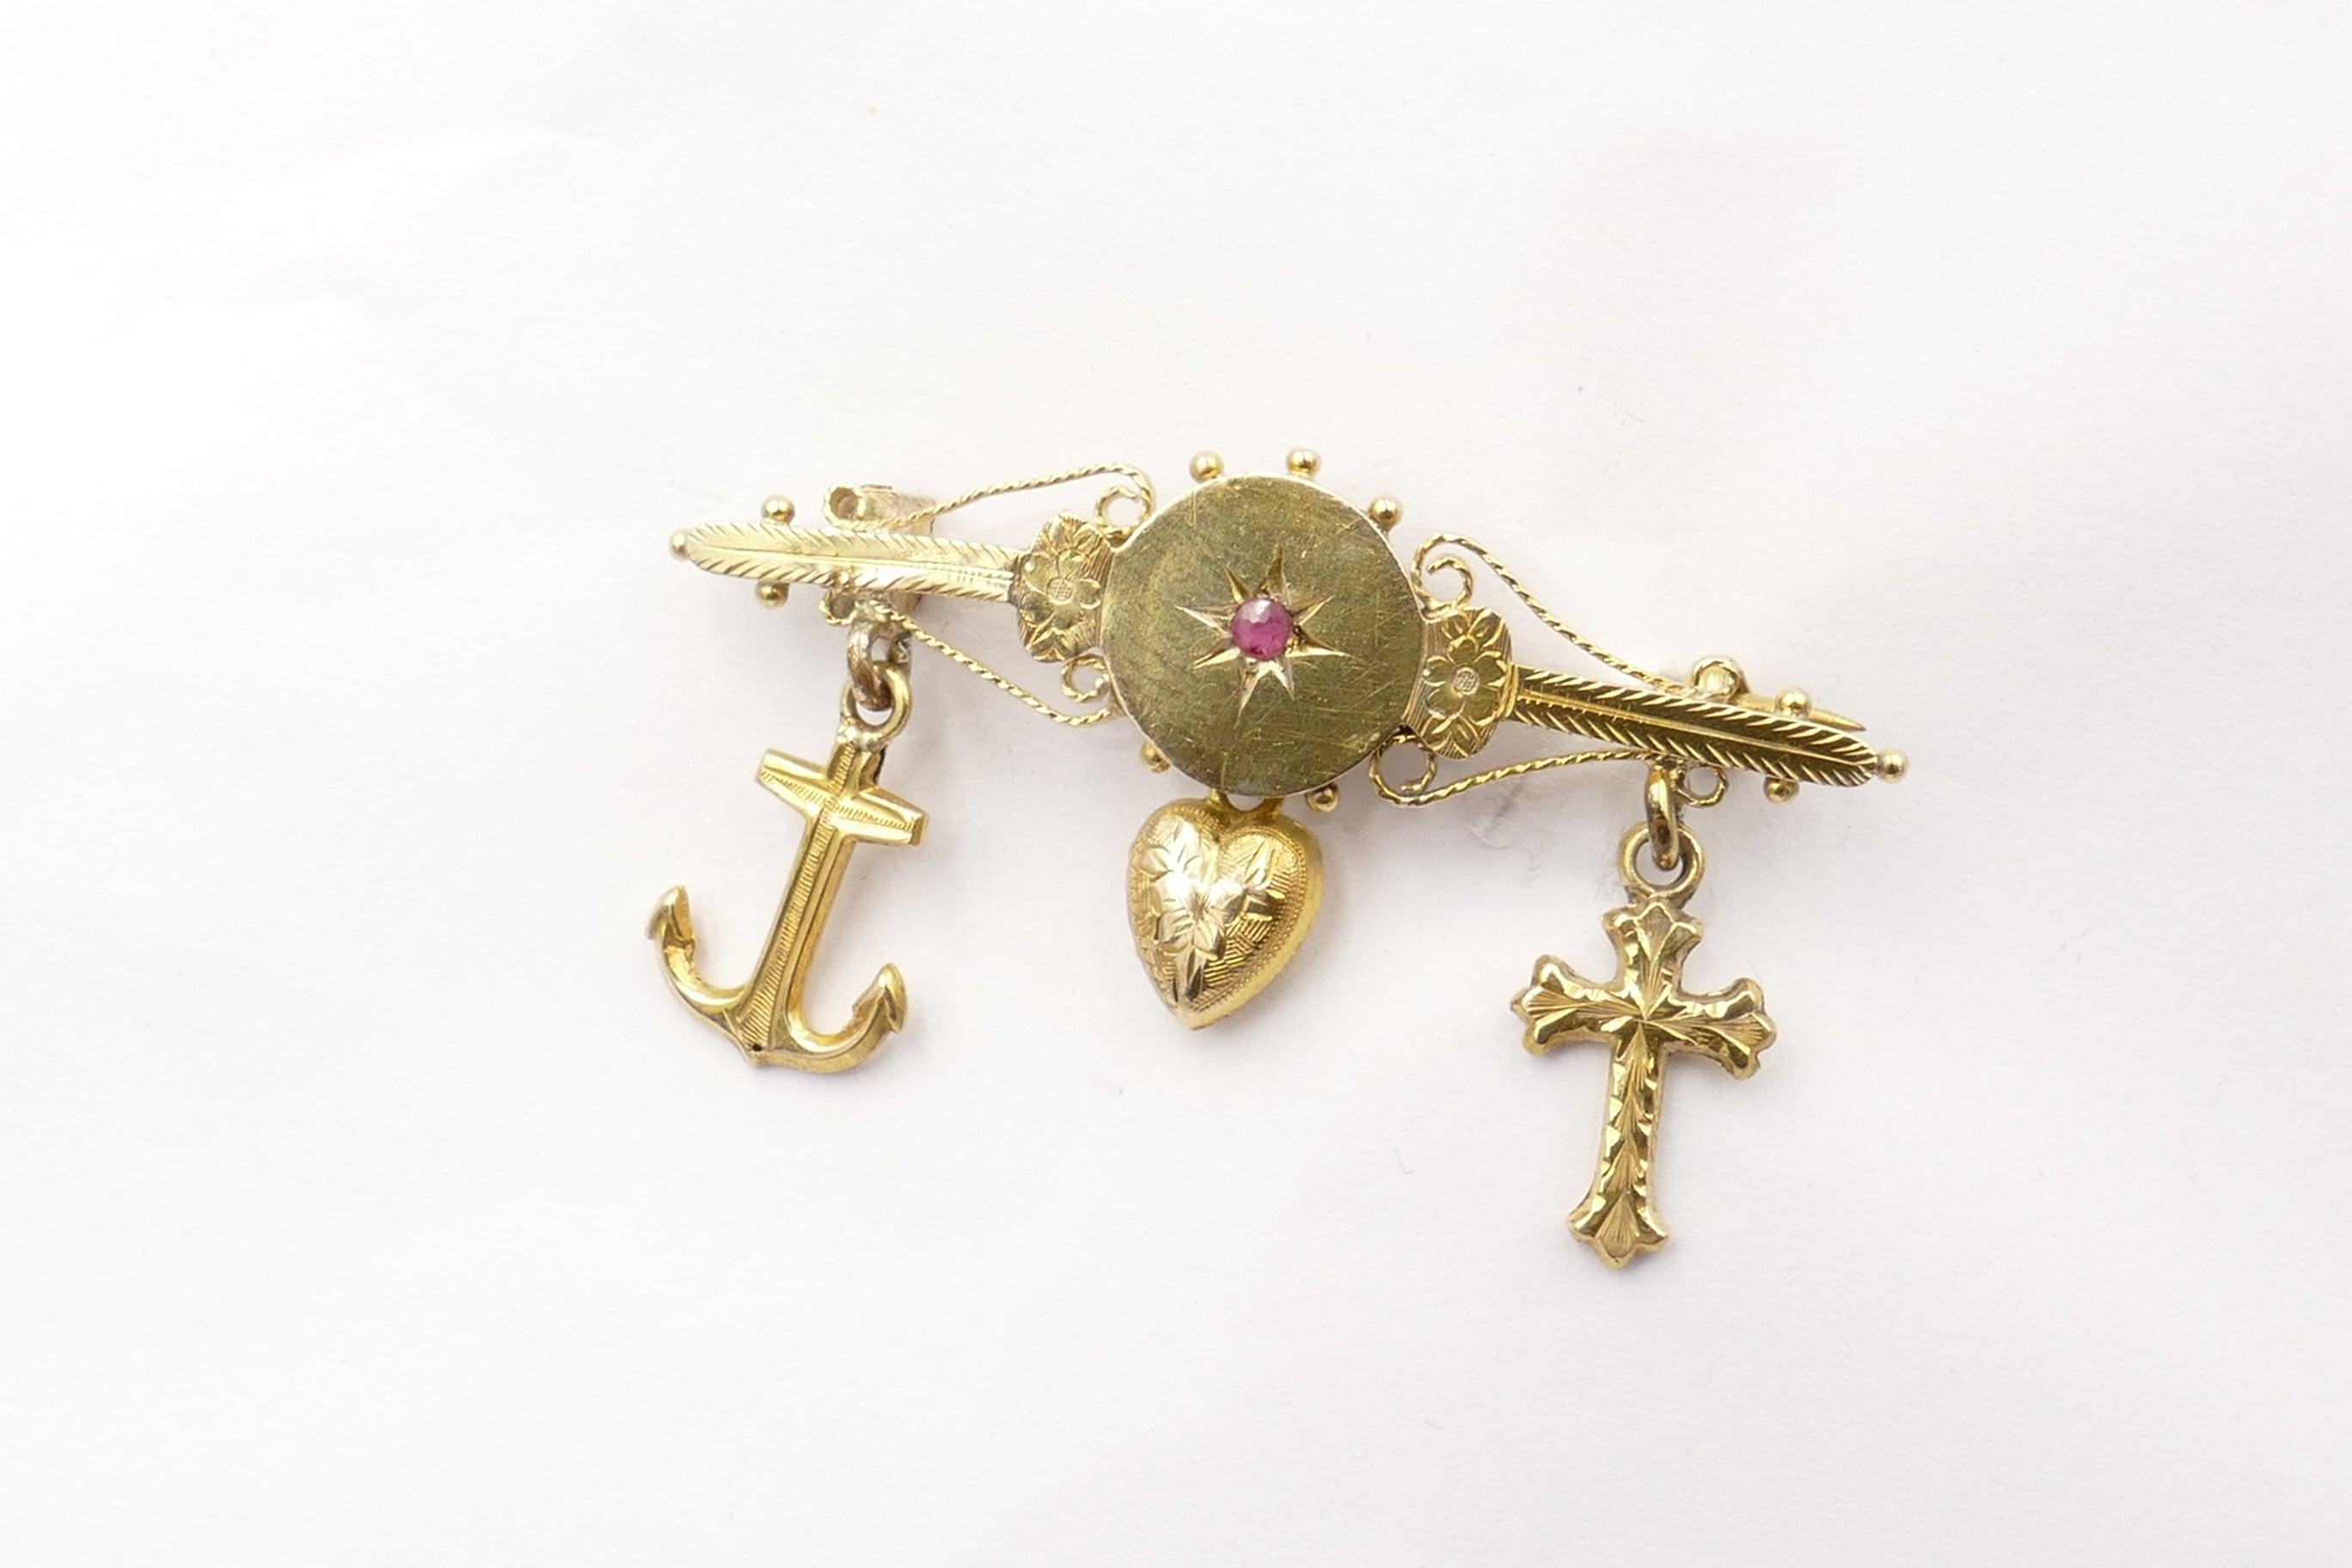 9ct Yellow Gold Victorian Brooch with the 3 hanging charms - an Anchor, a Heart & a Cross, 
depicting Faith Hope & Charity.
It features one reddish-purple Ruby in the centre of the Bar, eye clean & of medium tone.
The Brooch has Foliate detailand